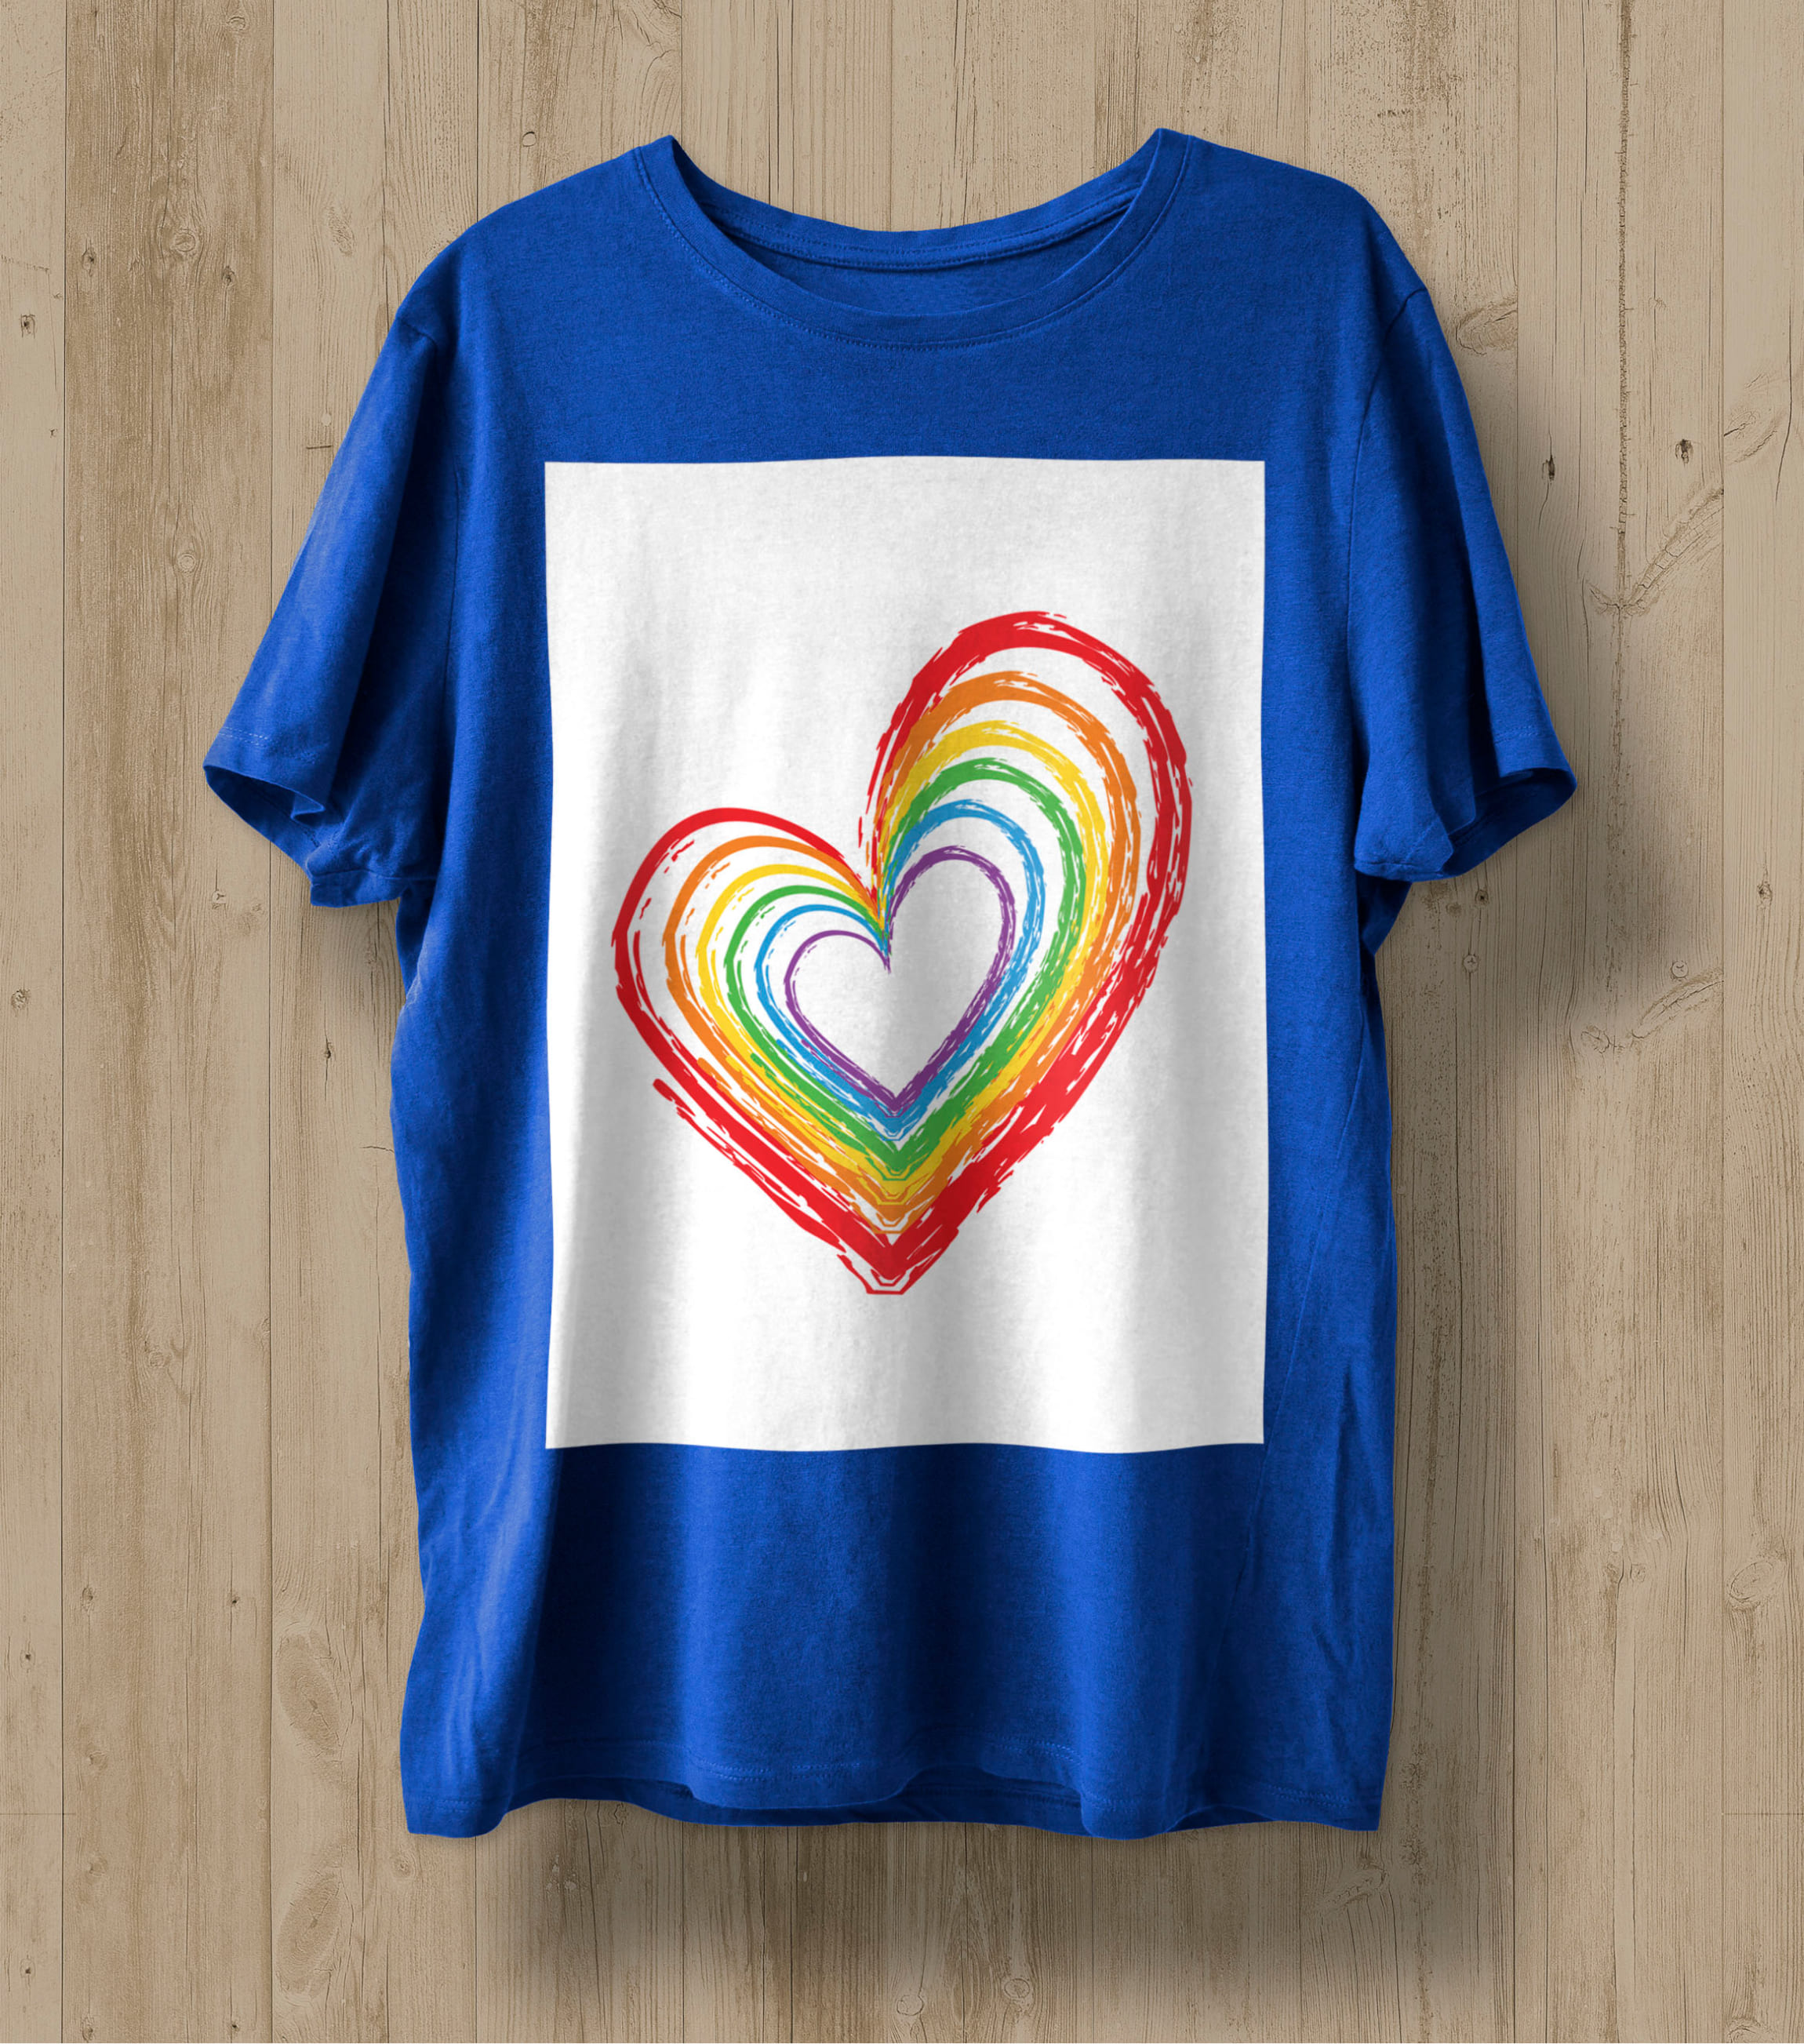 Blue t-shirt with a heart in the colors of the LGBT flag in a white rectangle.